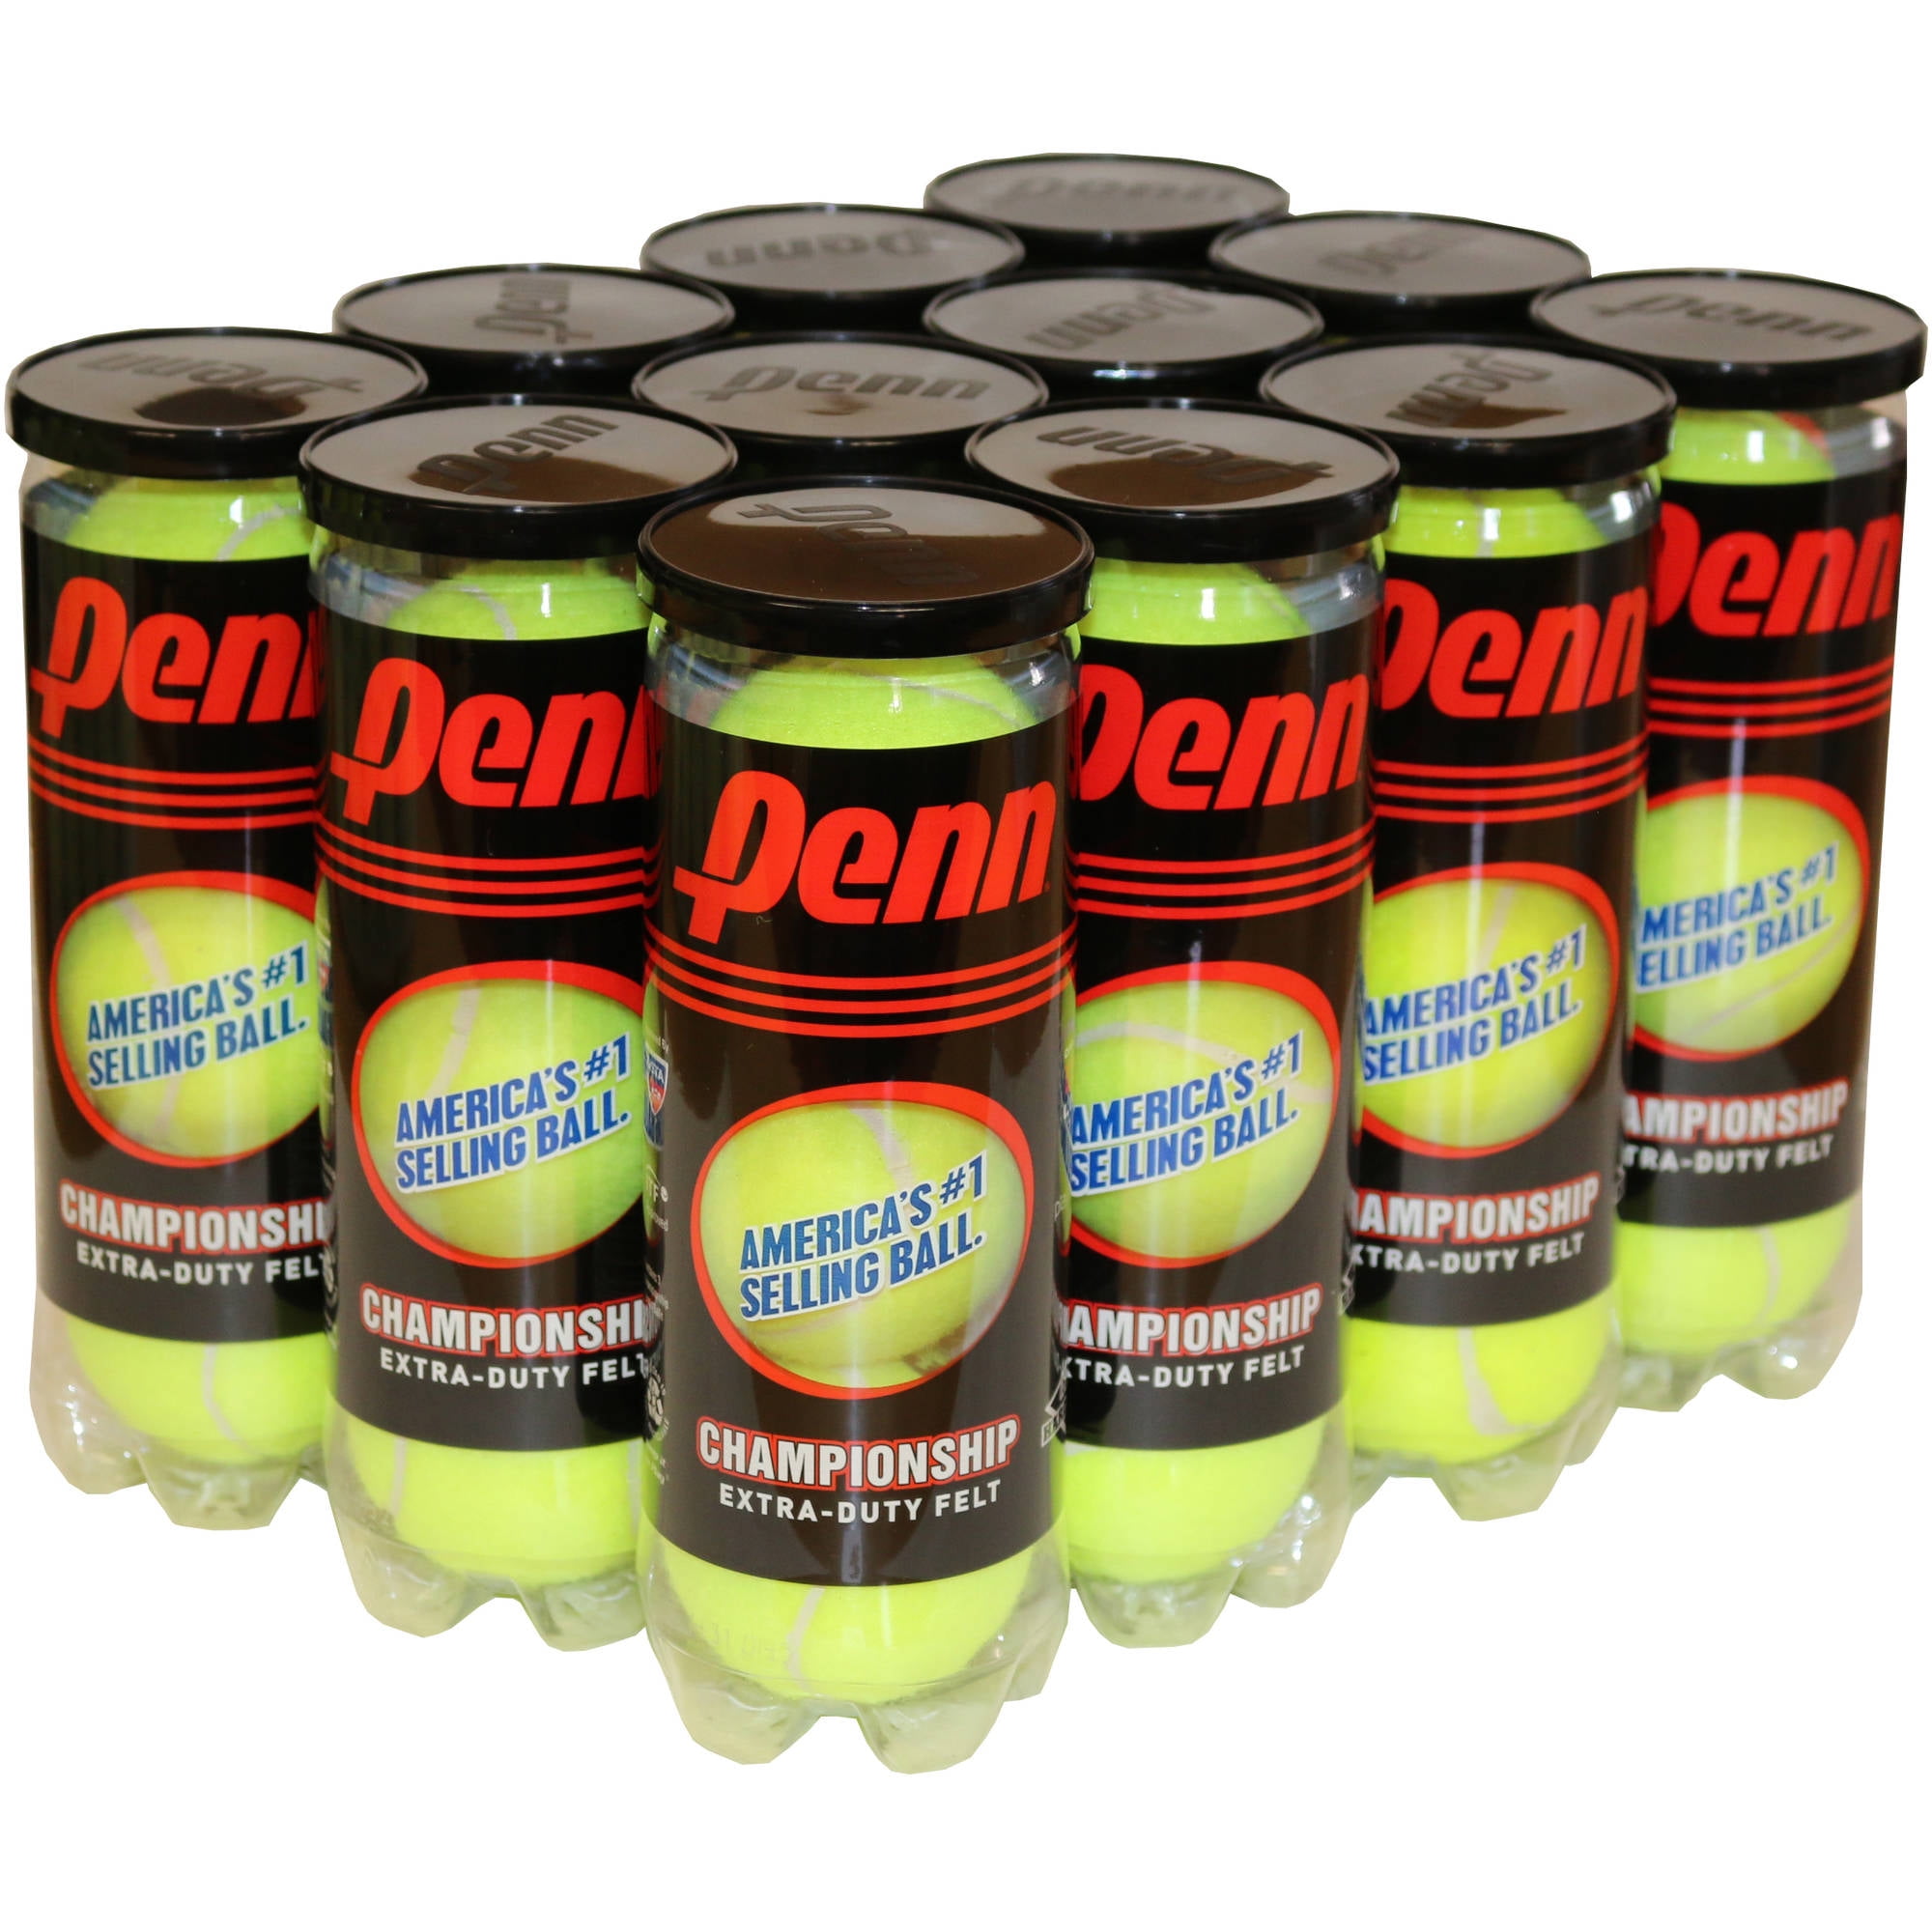 48 Balls NEW 2020 Penn Championship Tennis Ball LASTING DURABILITY PENN PERFORMANCE BALLS GOOD FOR ALL COURTS Official Ball of USTA Leagues EXTRA-DUTY FELT ! AMERICAS #1 SELLING BALL 16 Cans 